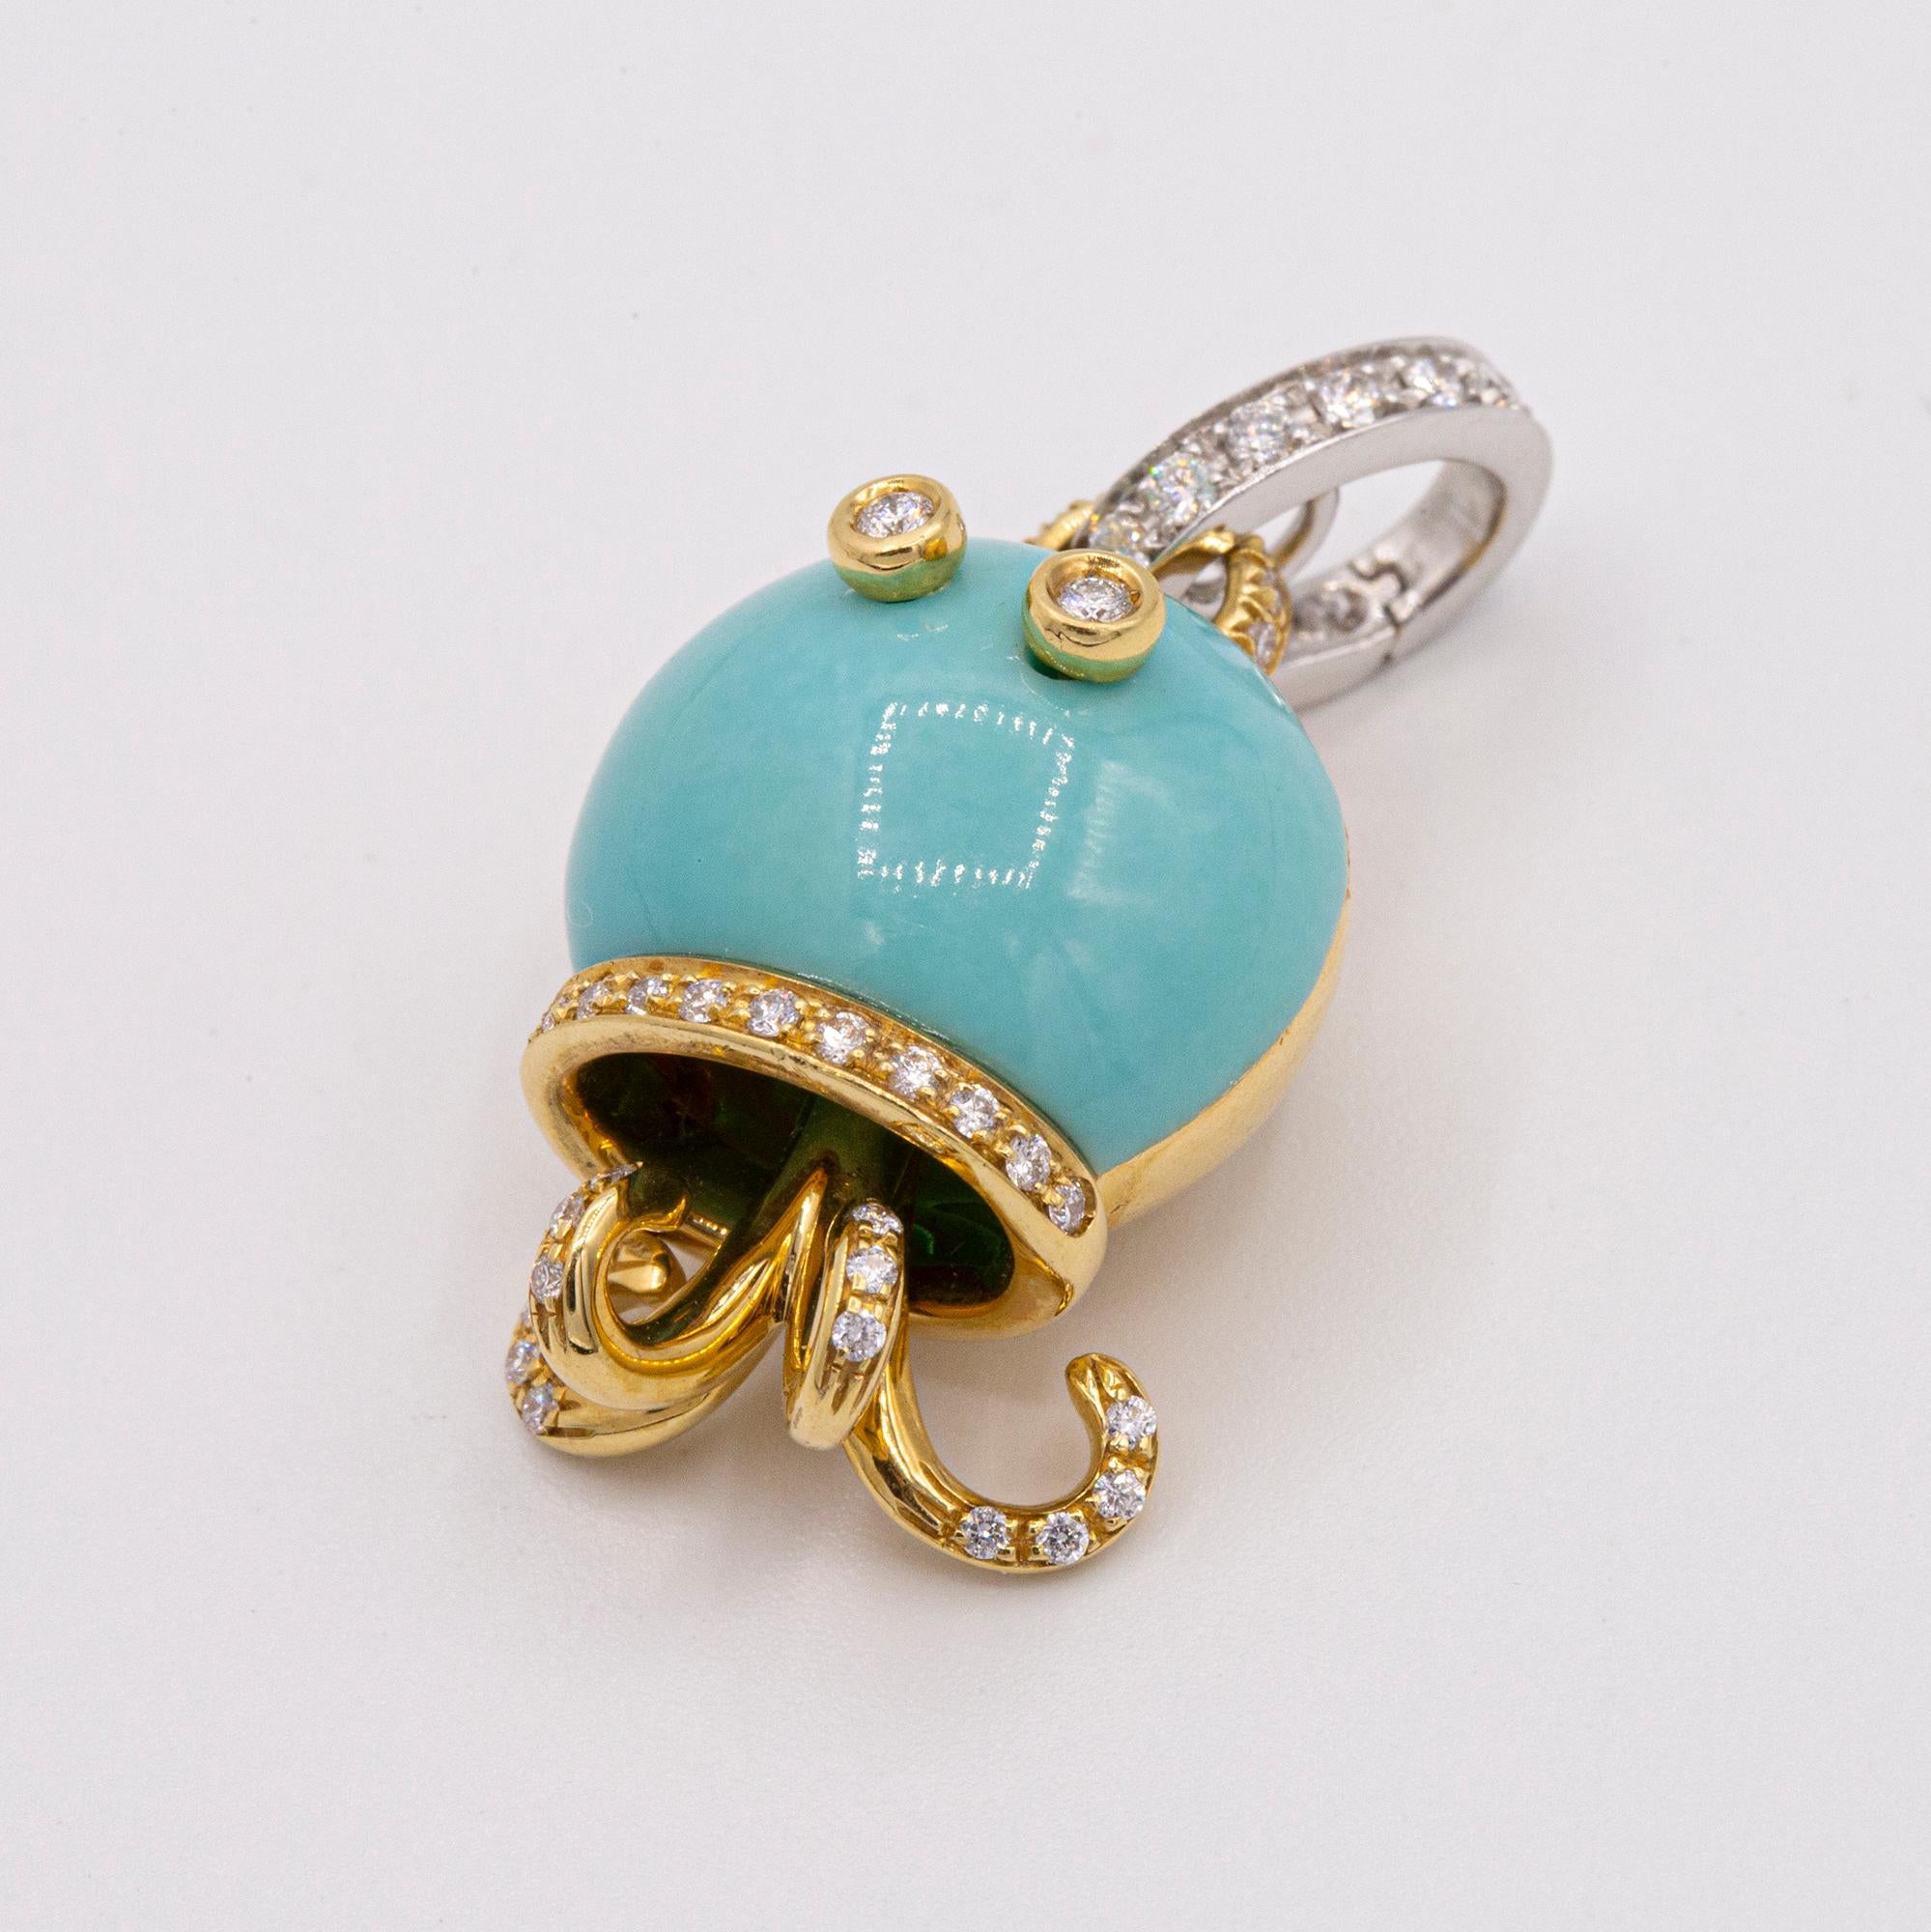 Chantecler jewelry is inspired by the Island of Capri's exotic natural environment. Marinelle octopus charm in 18k yellow gold with turquoise and diamonds.